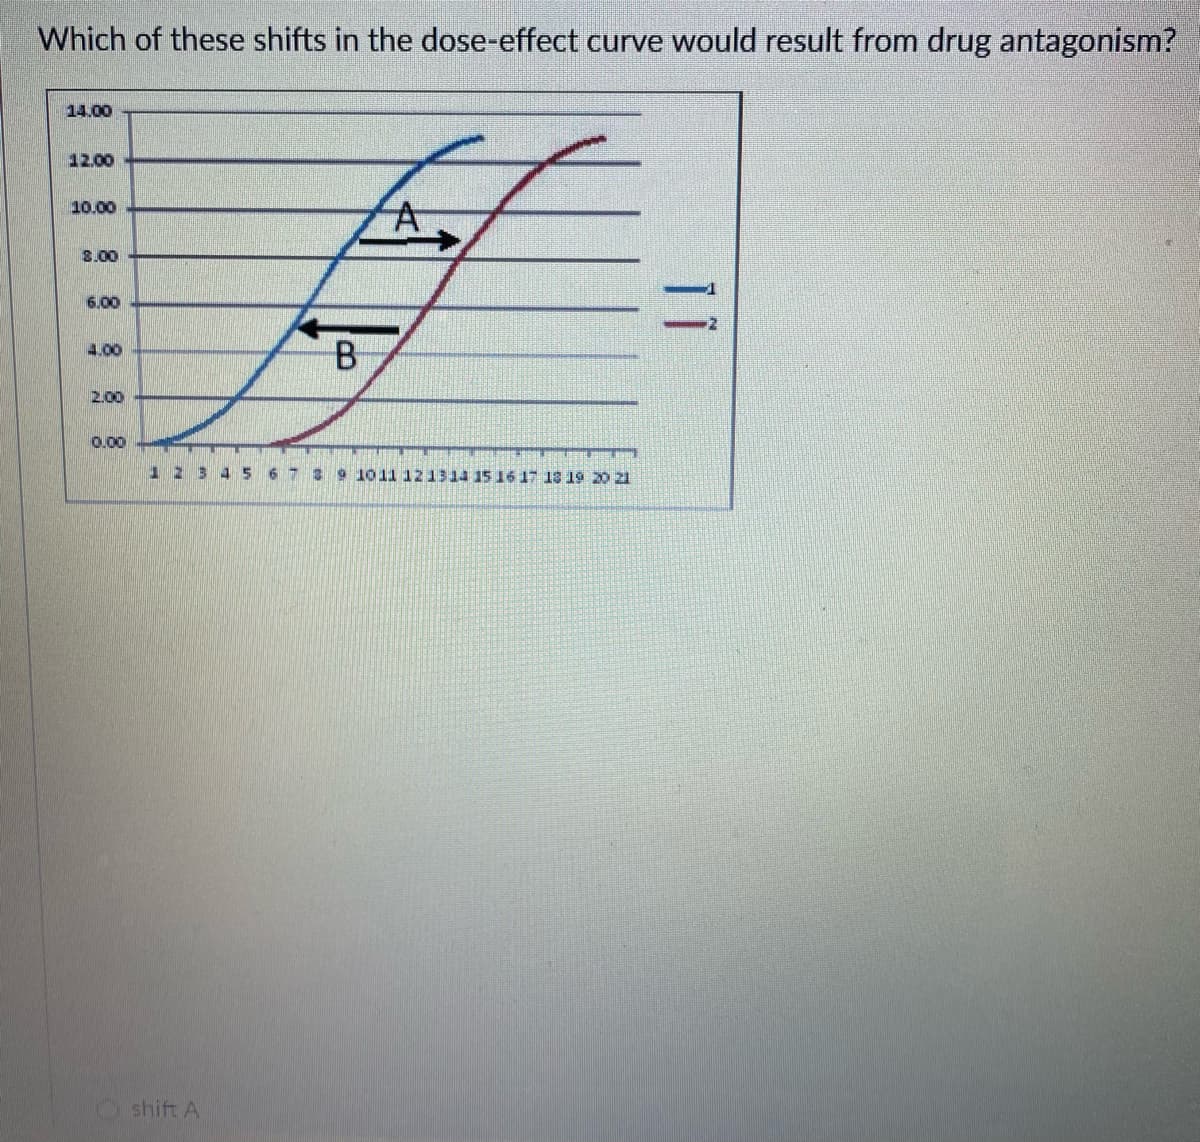 Which of these shifts in the dose-effect curve would result from drug antagonism?
14.00
12.00
10.00
3.00
6.00
4.00
B
2.00
0.00
12345
9 1011 121314 15 16 17 18 19 O 21
shift A
